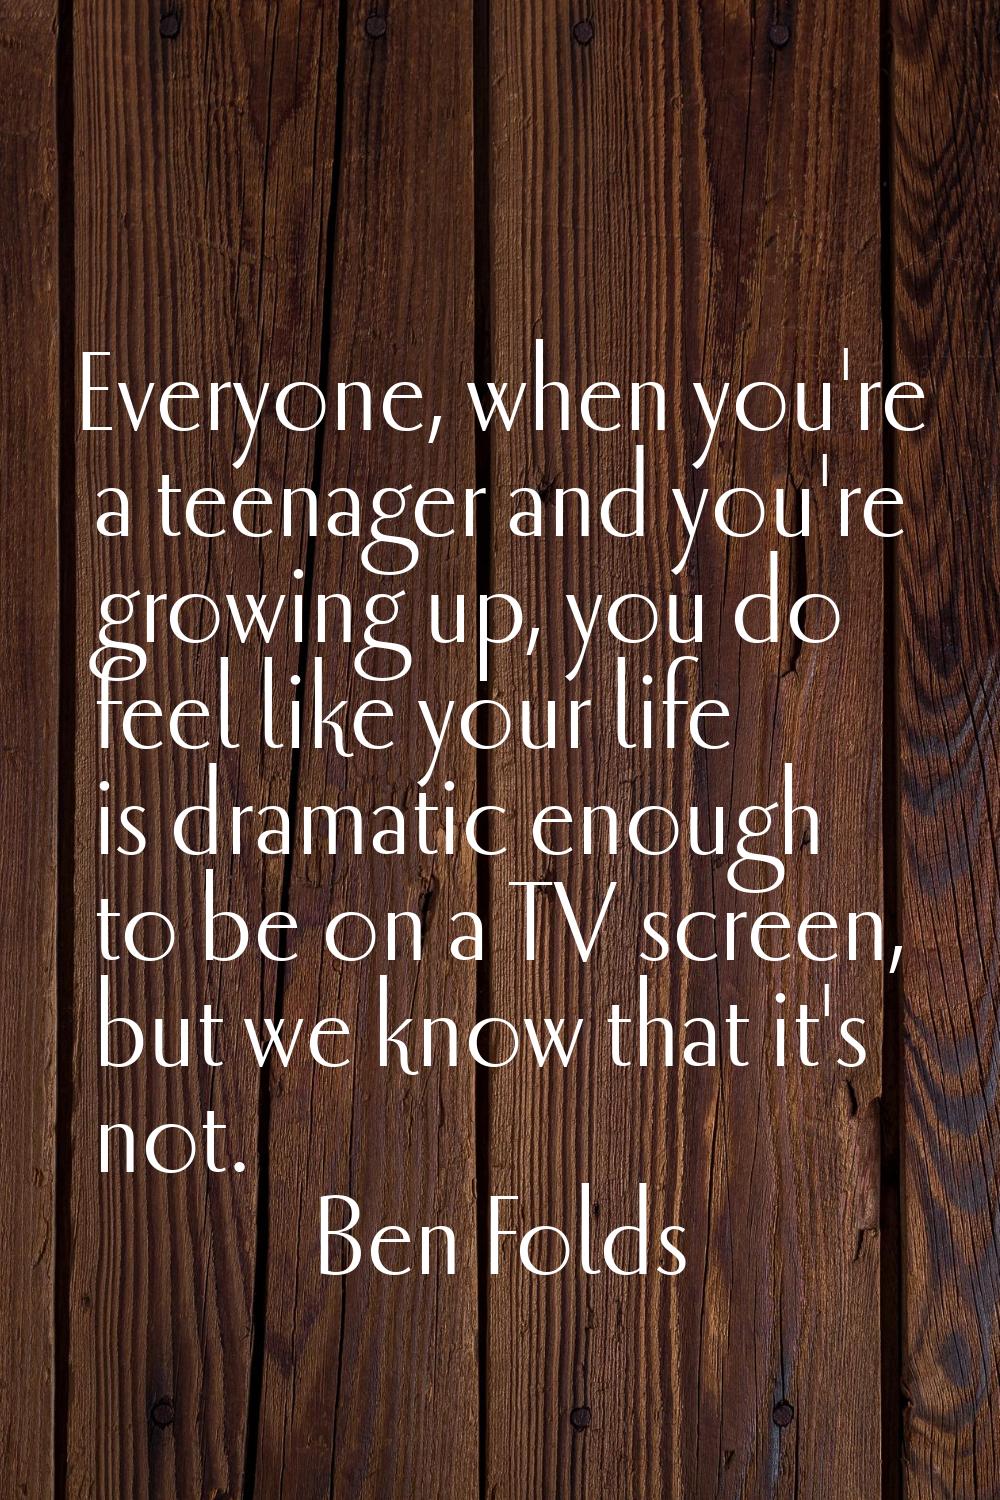 Everyone, when you're a teenager and you're growing up, you do feel like your life is dramatic enou